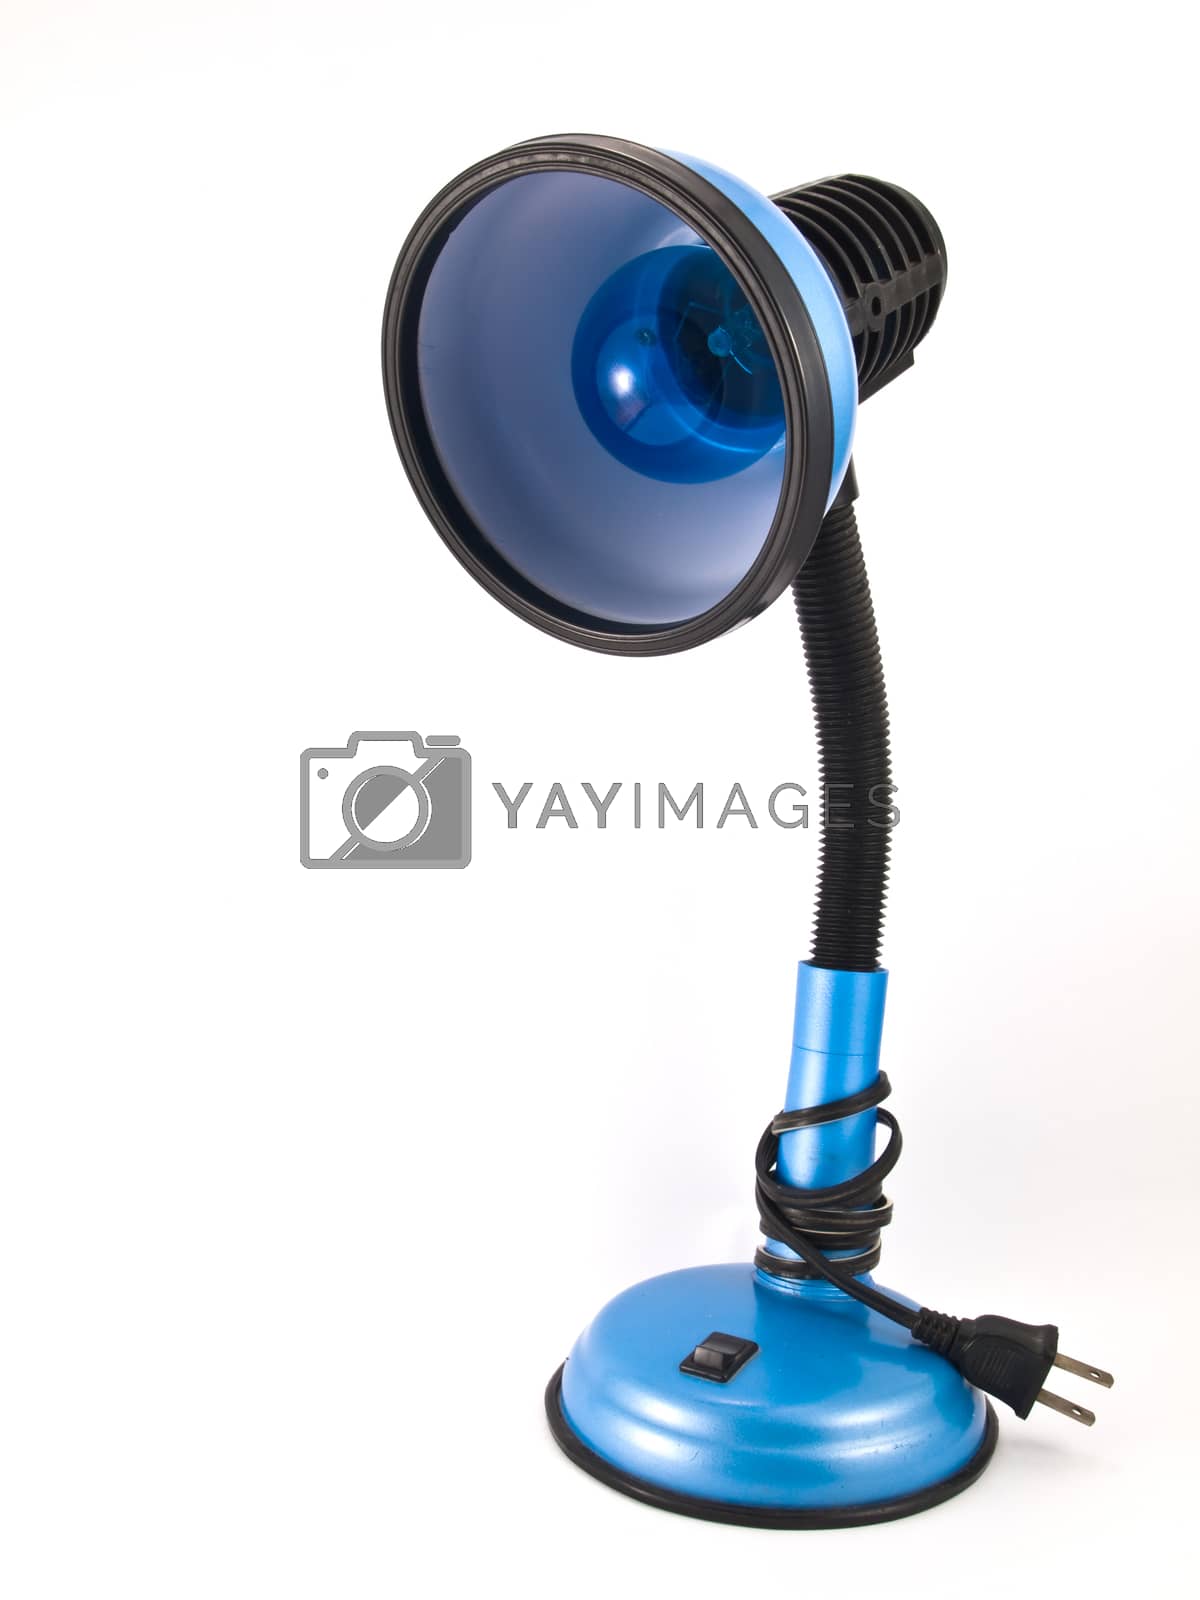 Royalty free image of blue lamp by zirconicusso